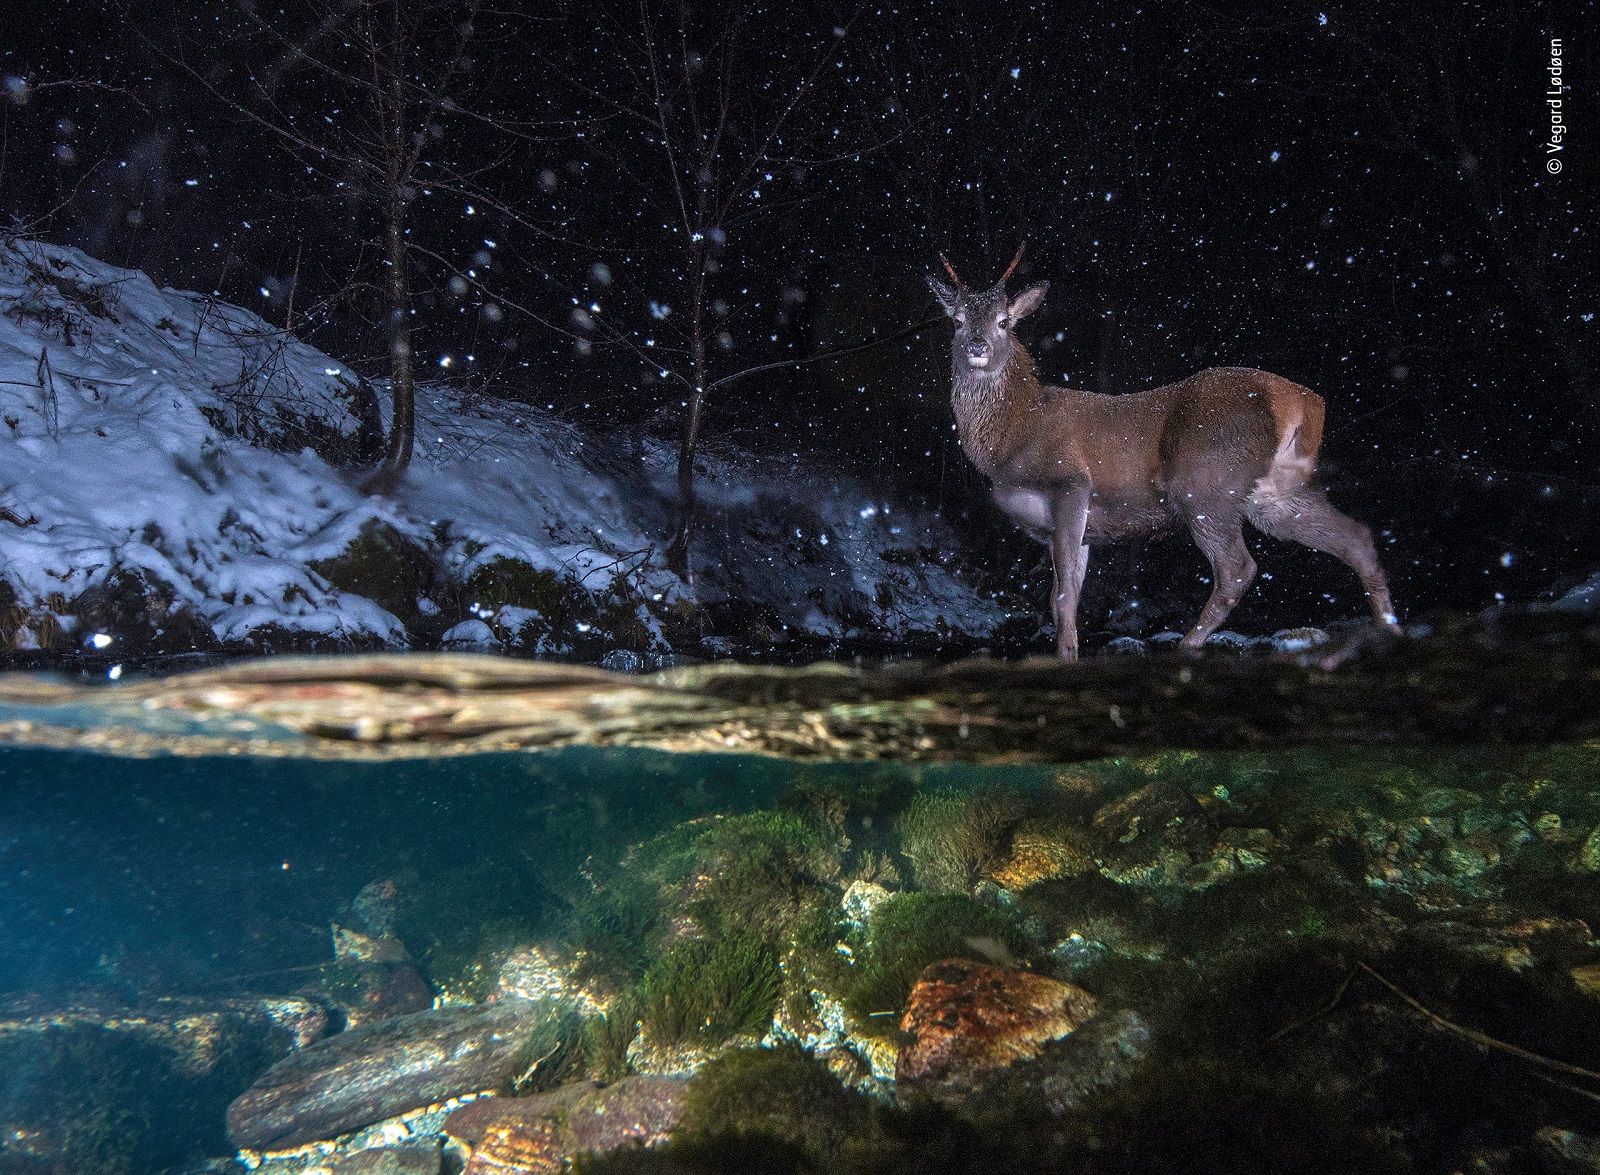 Incredible Images From The Wildlife Photographer Of The Year Competition image 27